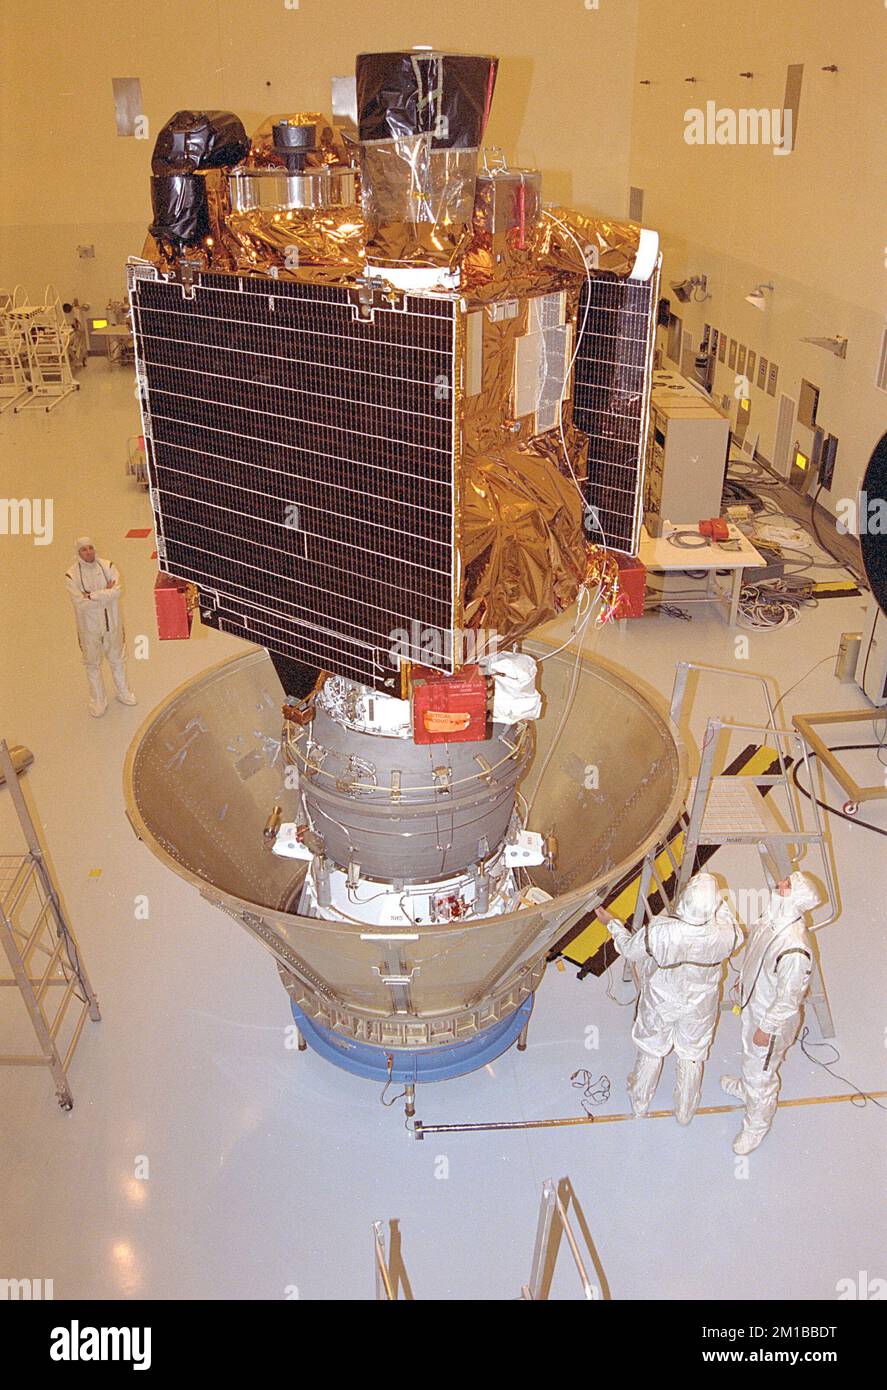 Jet Propulsion Laboratory (JPL) workers in the Payload Hazardous Servicing Facility (PHSF) prepare the Mars Global Surveyor spacecraft for transfer to the launch pad by placing it in a protective canister. The Surveyor spacecraft (upper) is already mated to its solid propellant upper stage booster (lower), which is actually the third stage of the Delta II expendable launch vehicle that will propel the spacecraft on its interplanetary journey to the Red Planet. Once at Launch Pad 17A on Cape Canaveral Air Station, the spacecraft and booster assembly will be stacked atop the Delta vehicle. The S Stock Photo